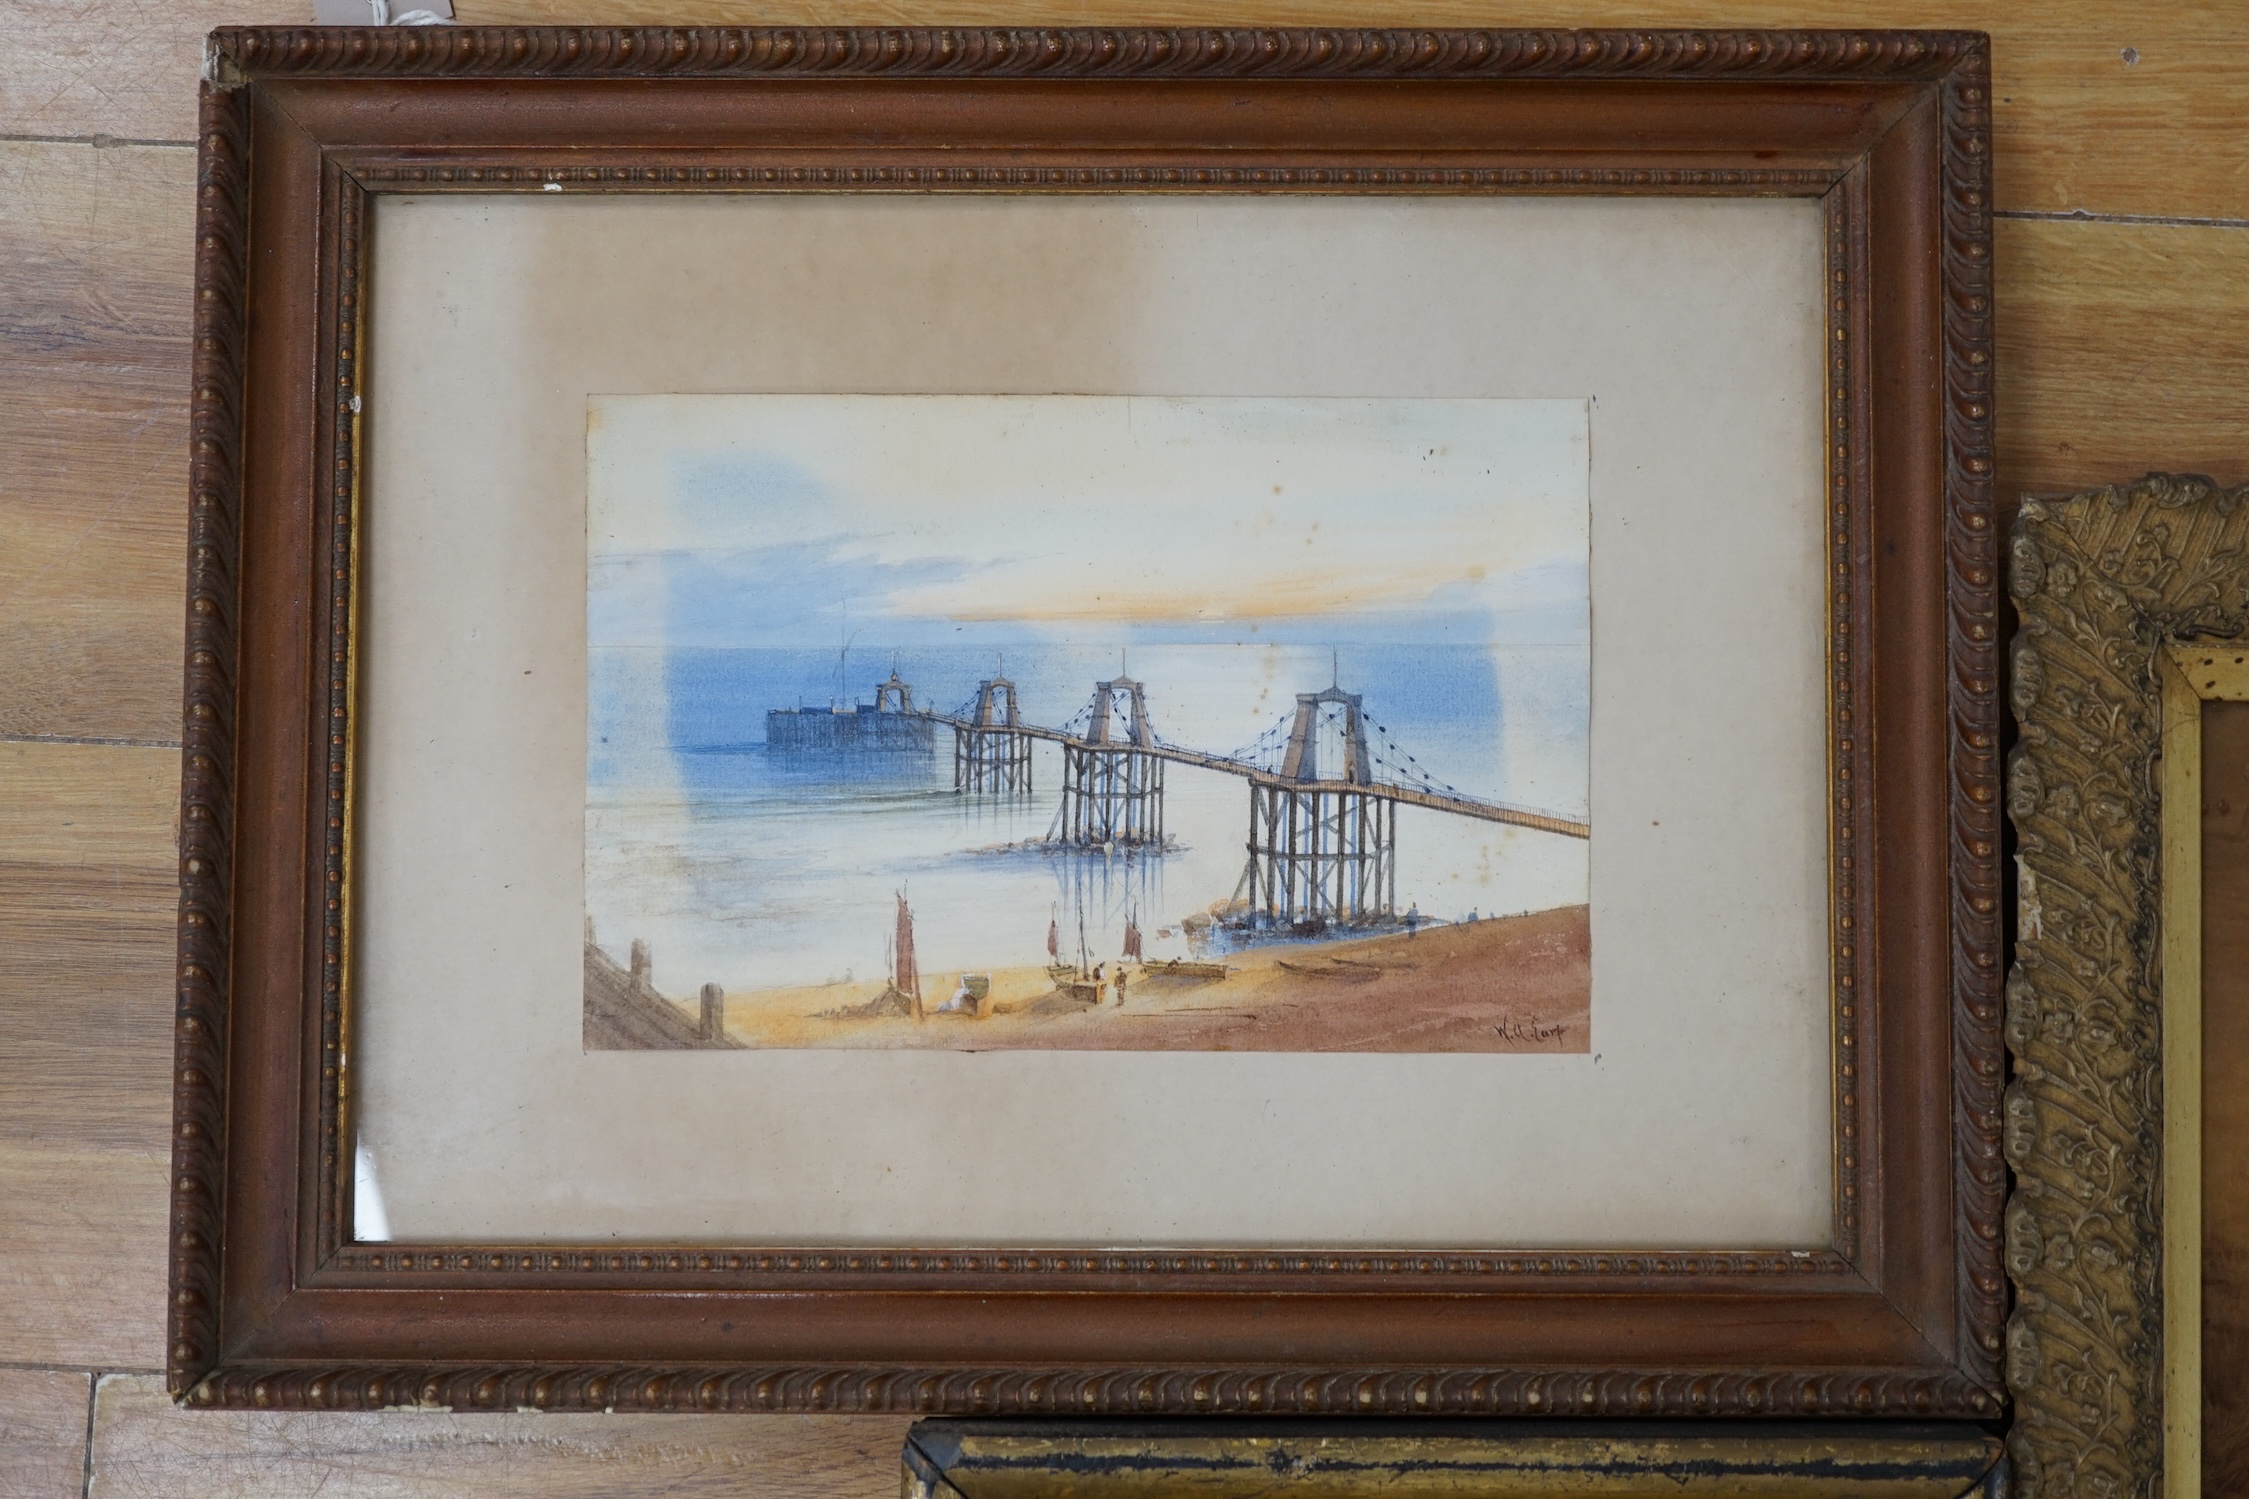 Two Victorian crystoleums including after Edmond Louyot (French, 1861-1920), Children on a beach, copyright 1906 by Franz Hanfstaengl, and a 19th century watercolour of a pier by W.A. Earp, 25 x 16cm. Condition - fair